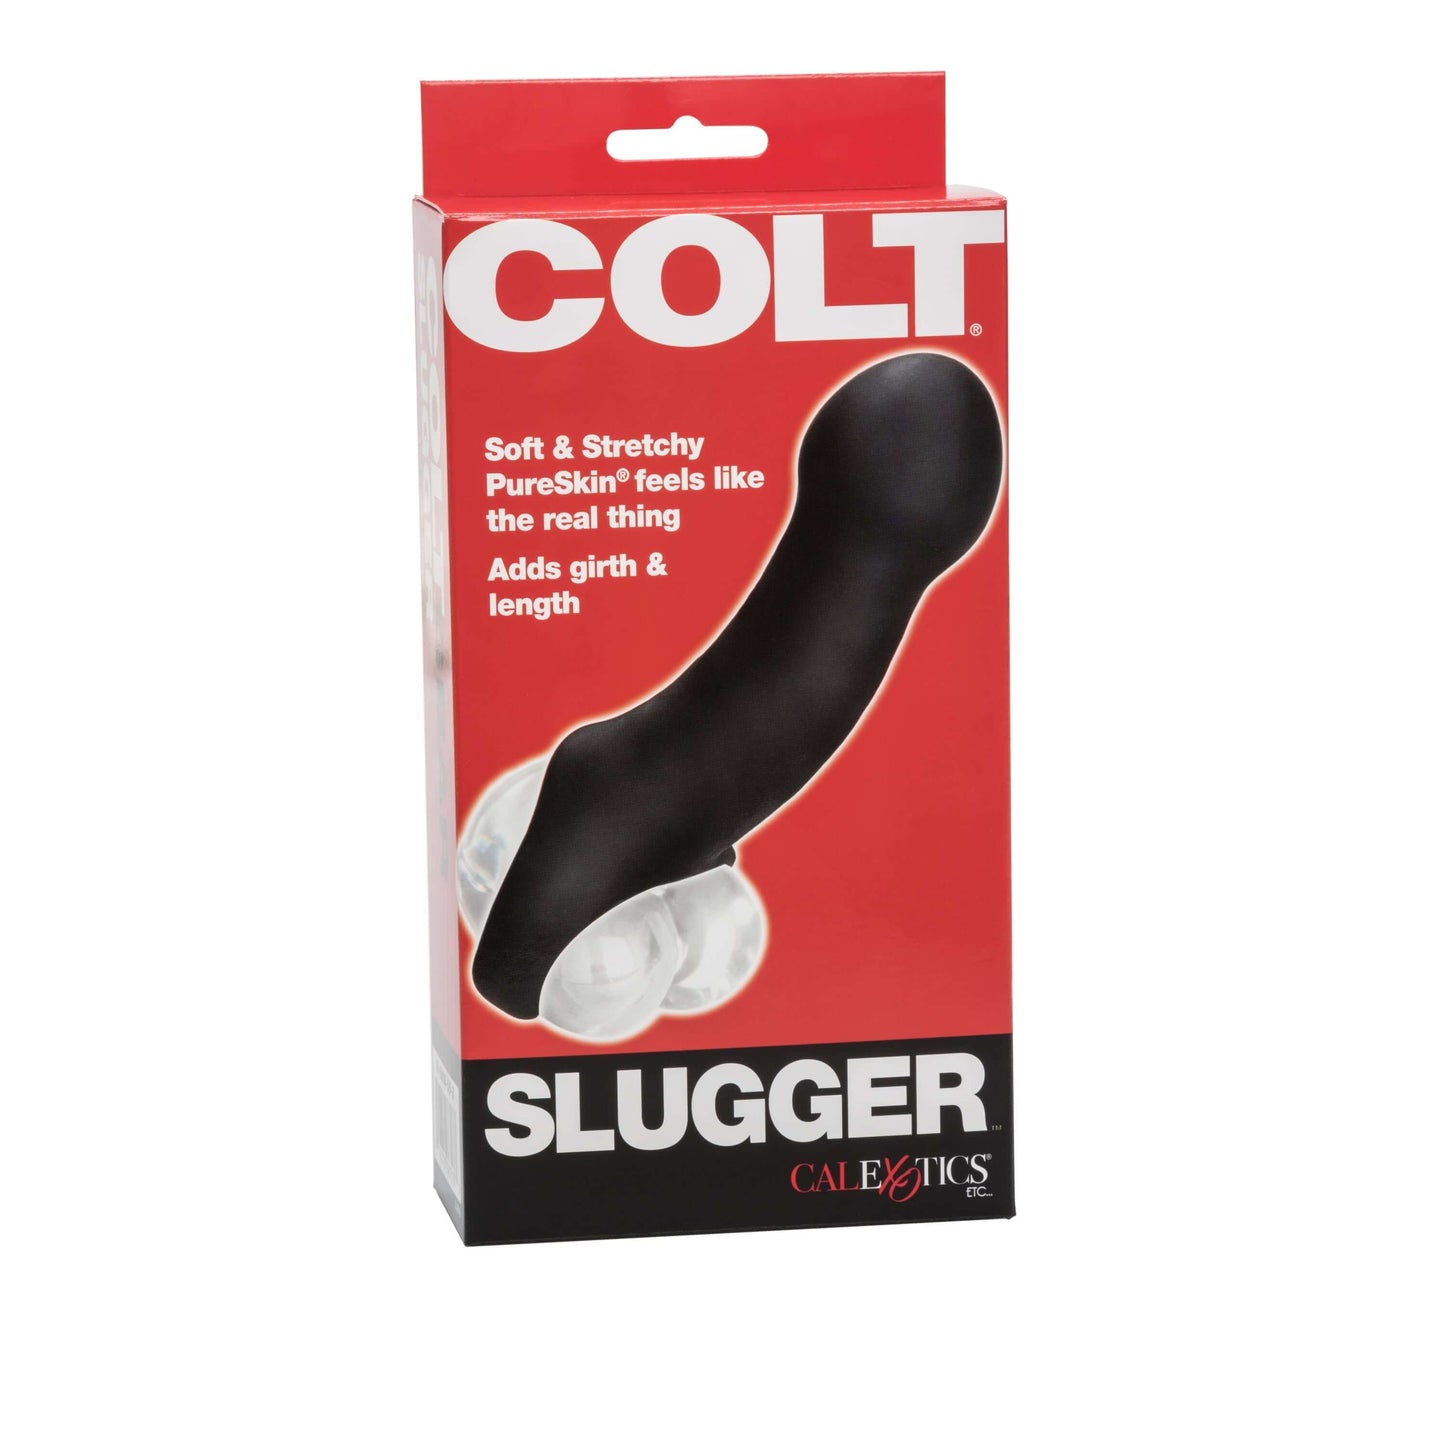 Colt Slugger Penis Extension Sleeve - Thorn & Feather